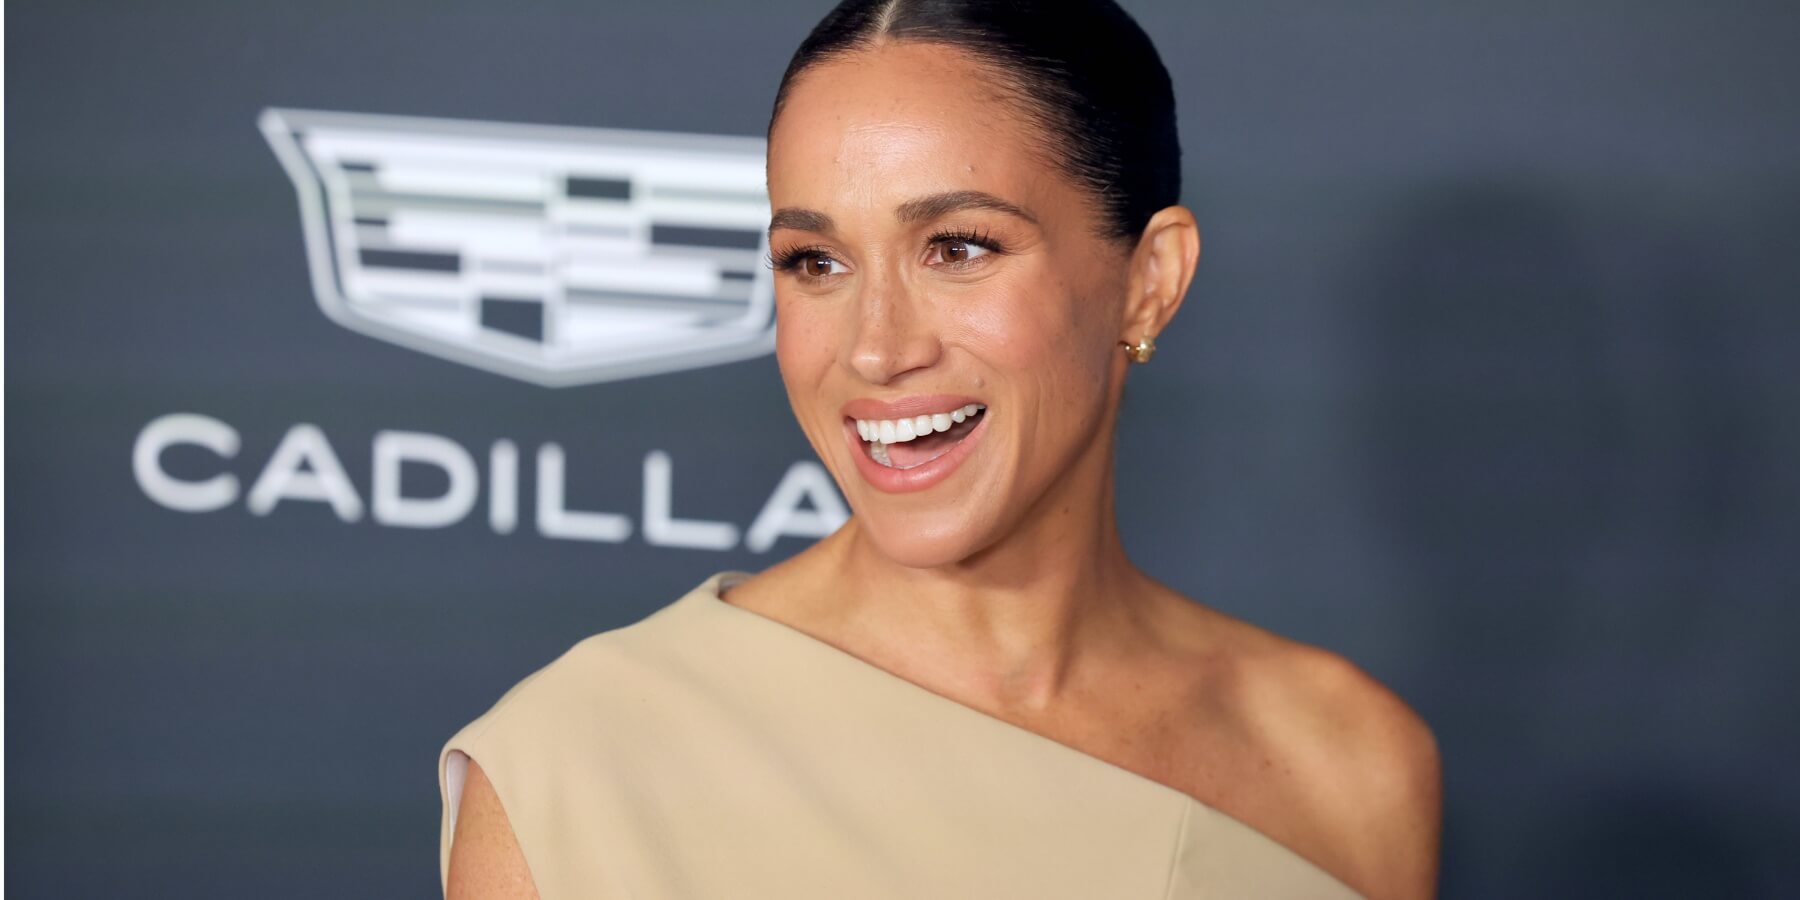 Meghan Markle's rebrand may be in question after 'Endgame' release.